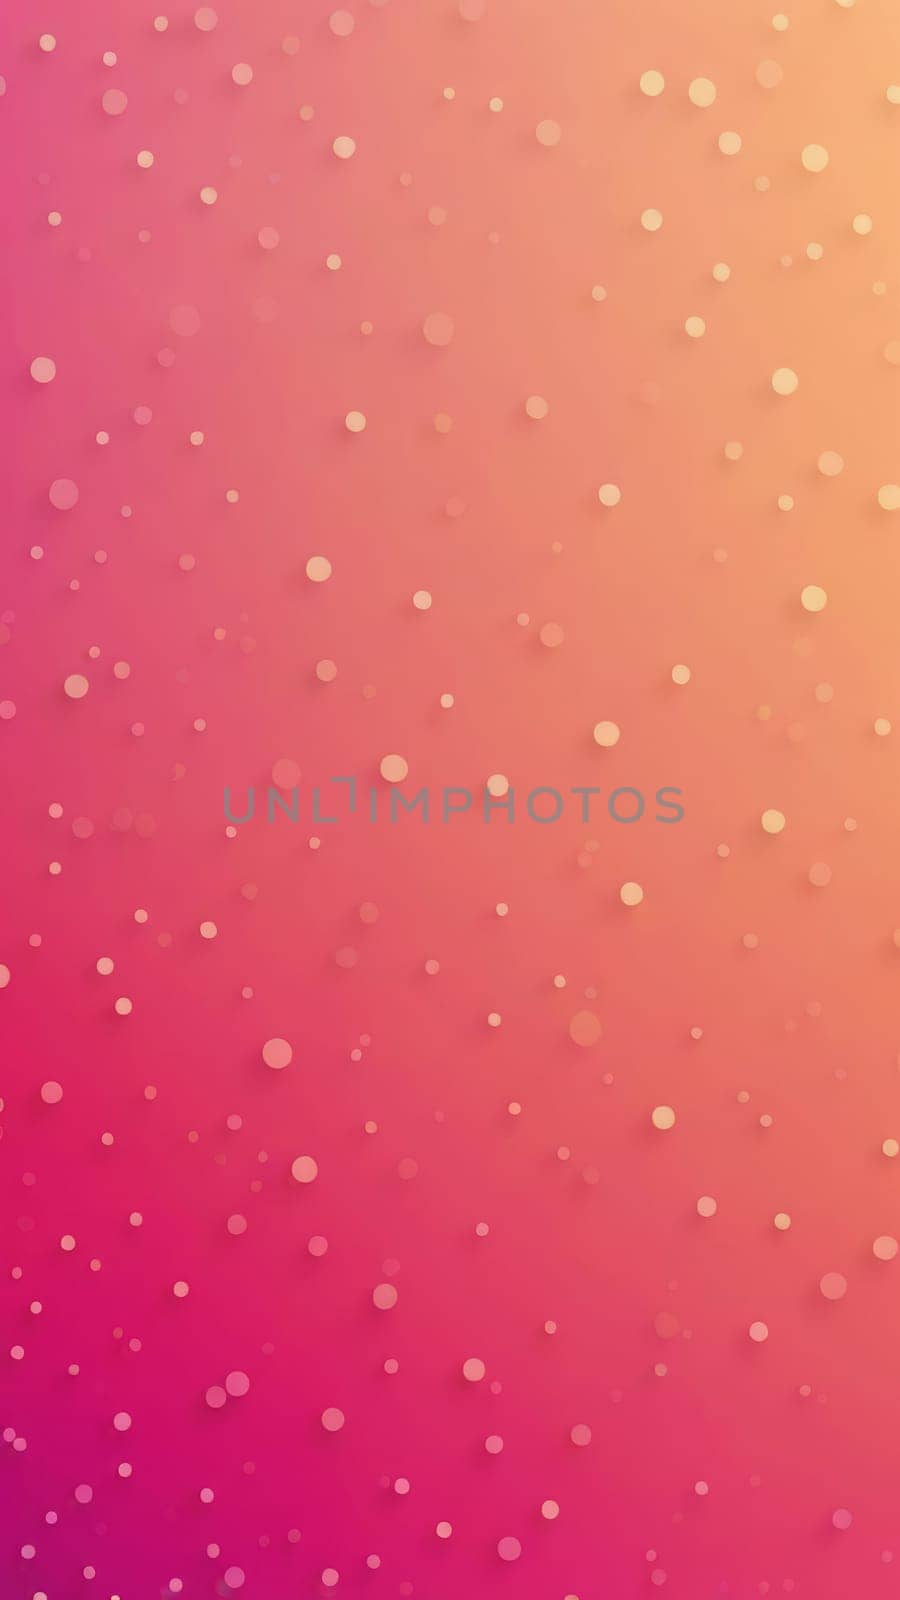 Screen background from Dotted shapes and fuchsia by nkotlyar